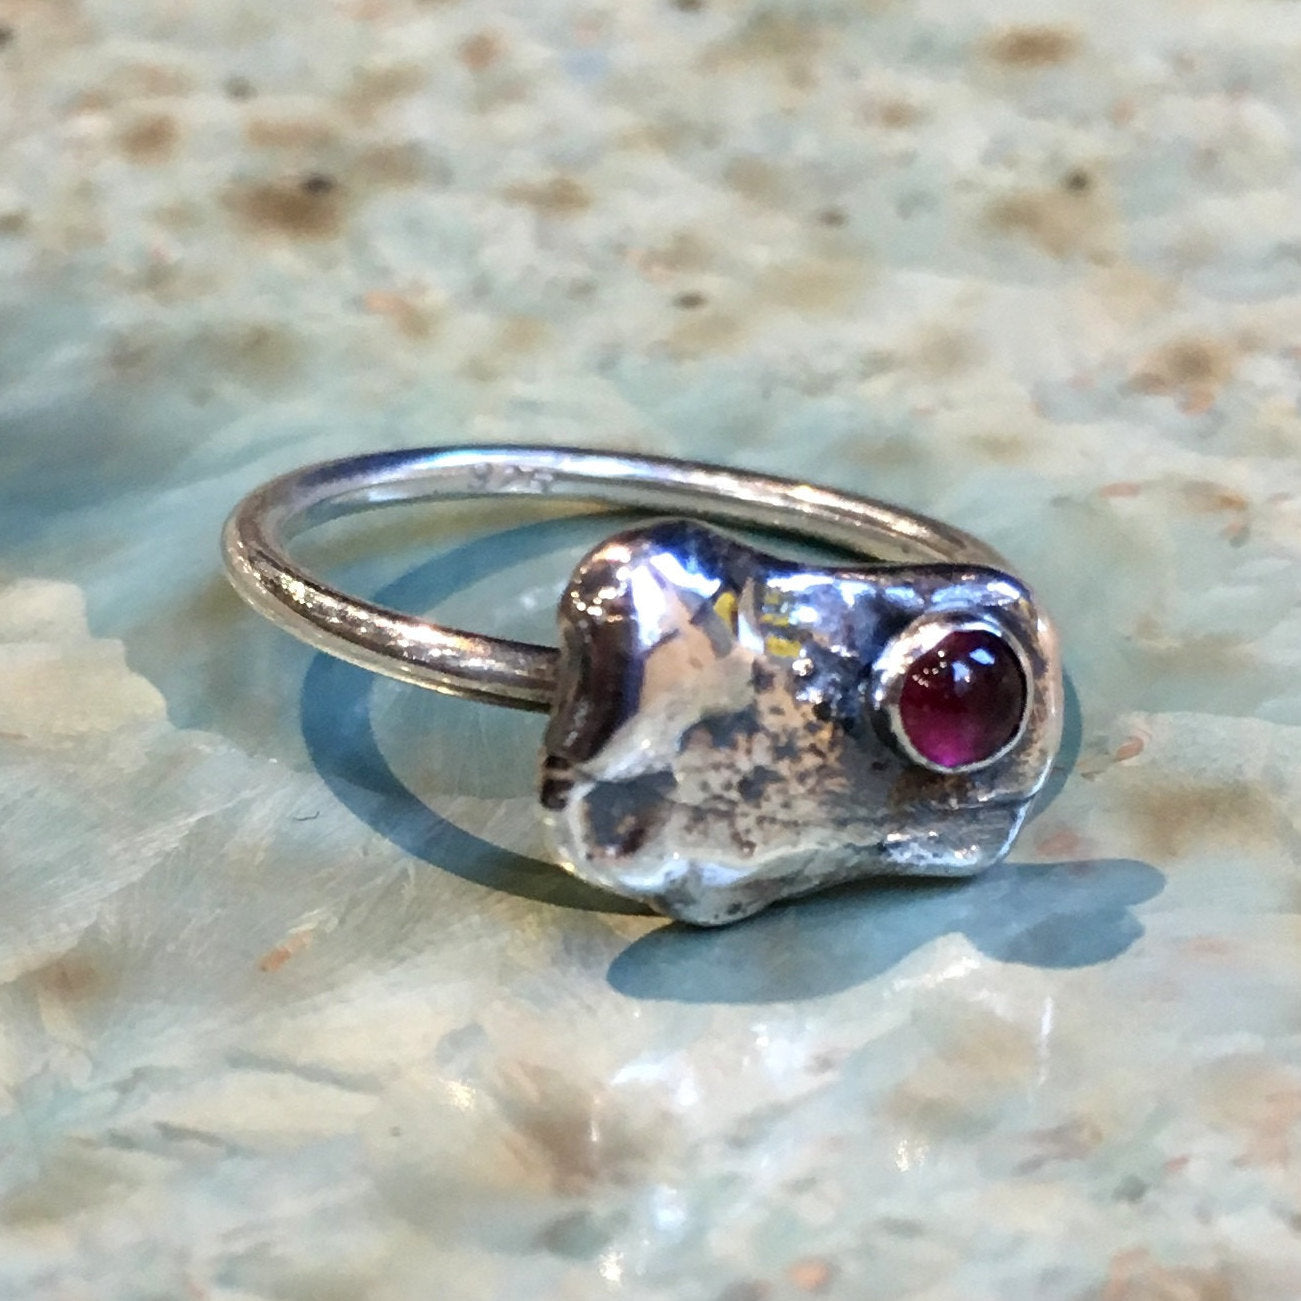 Garnet ring, silver nugget ring, stacking ring, sterling silver ring, birthstone ring, simple dainty ring, delicate ring - Origin R2484-3